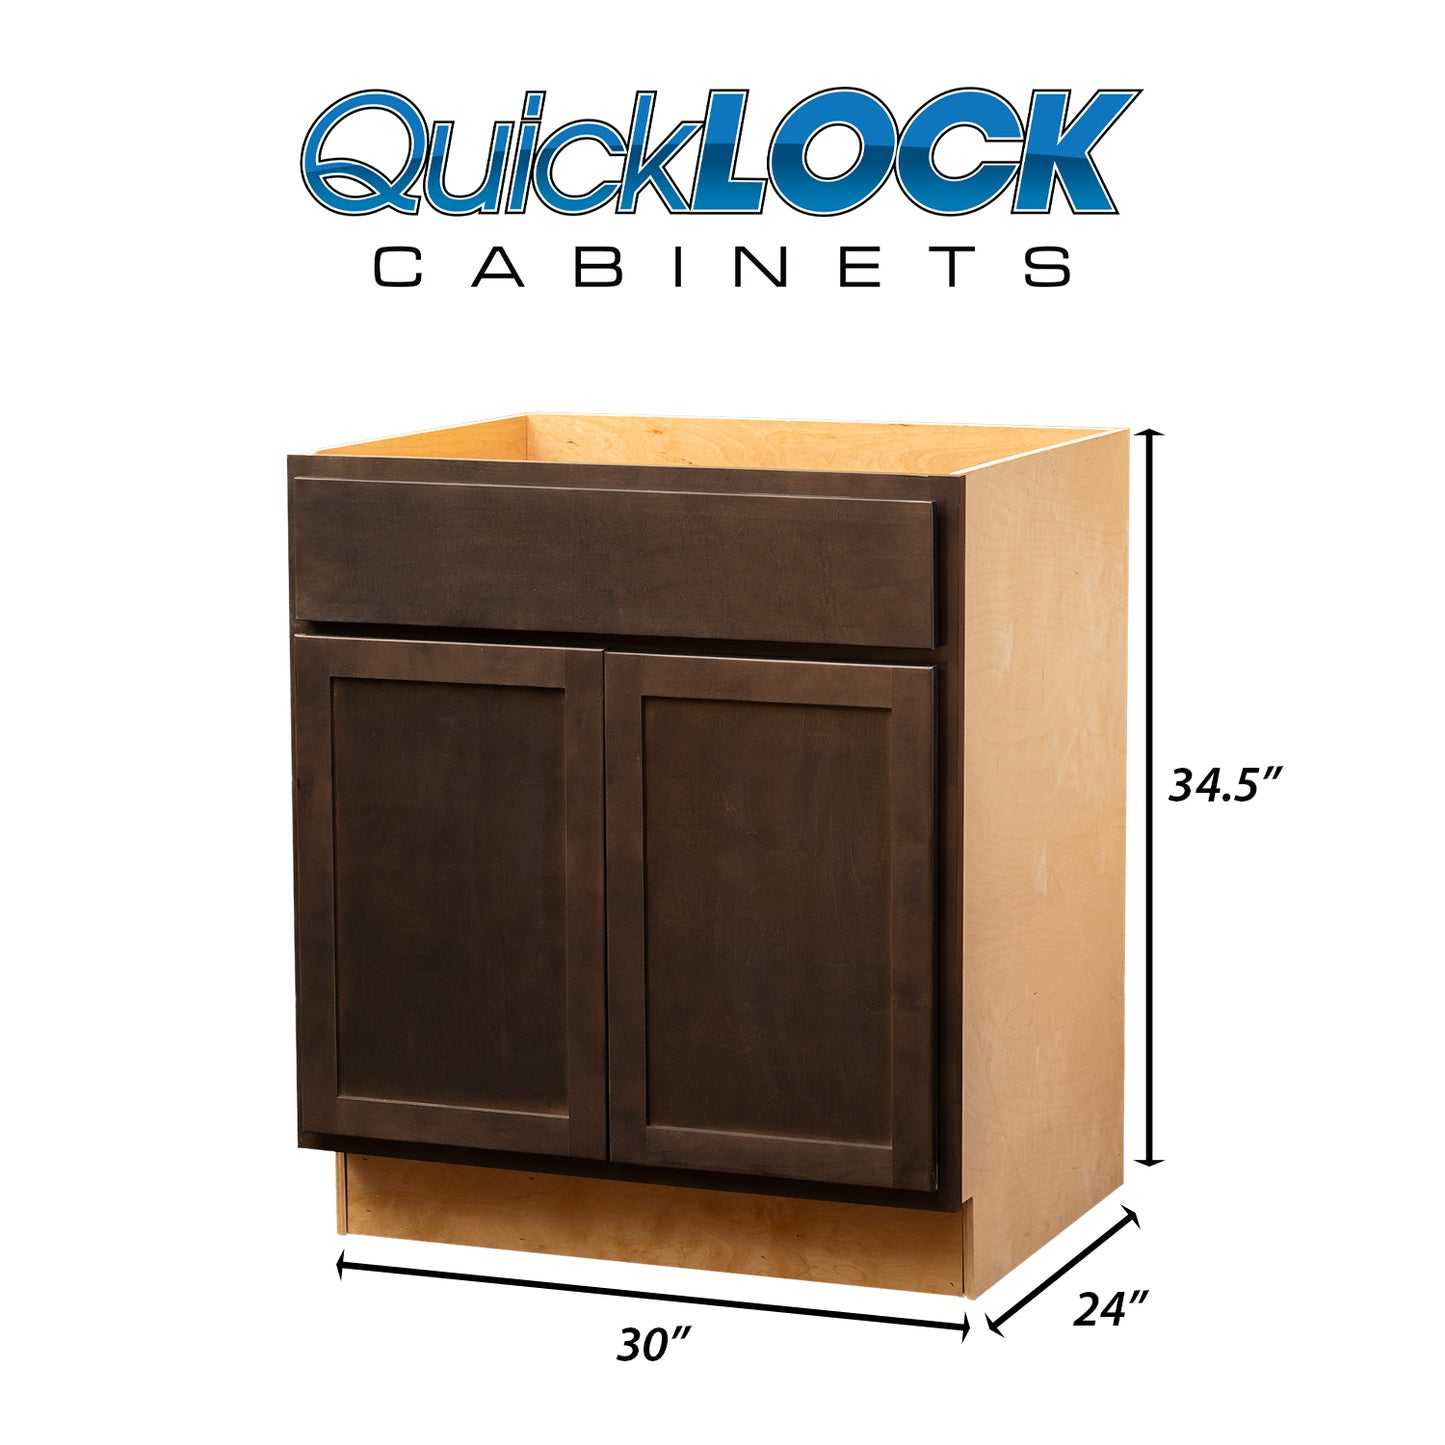 Quicklock RTA (Ready-to-Assemble) Espresso Stain Base Cabinet- Large